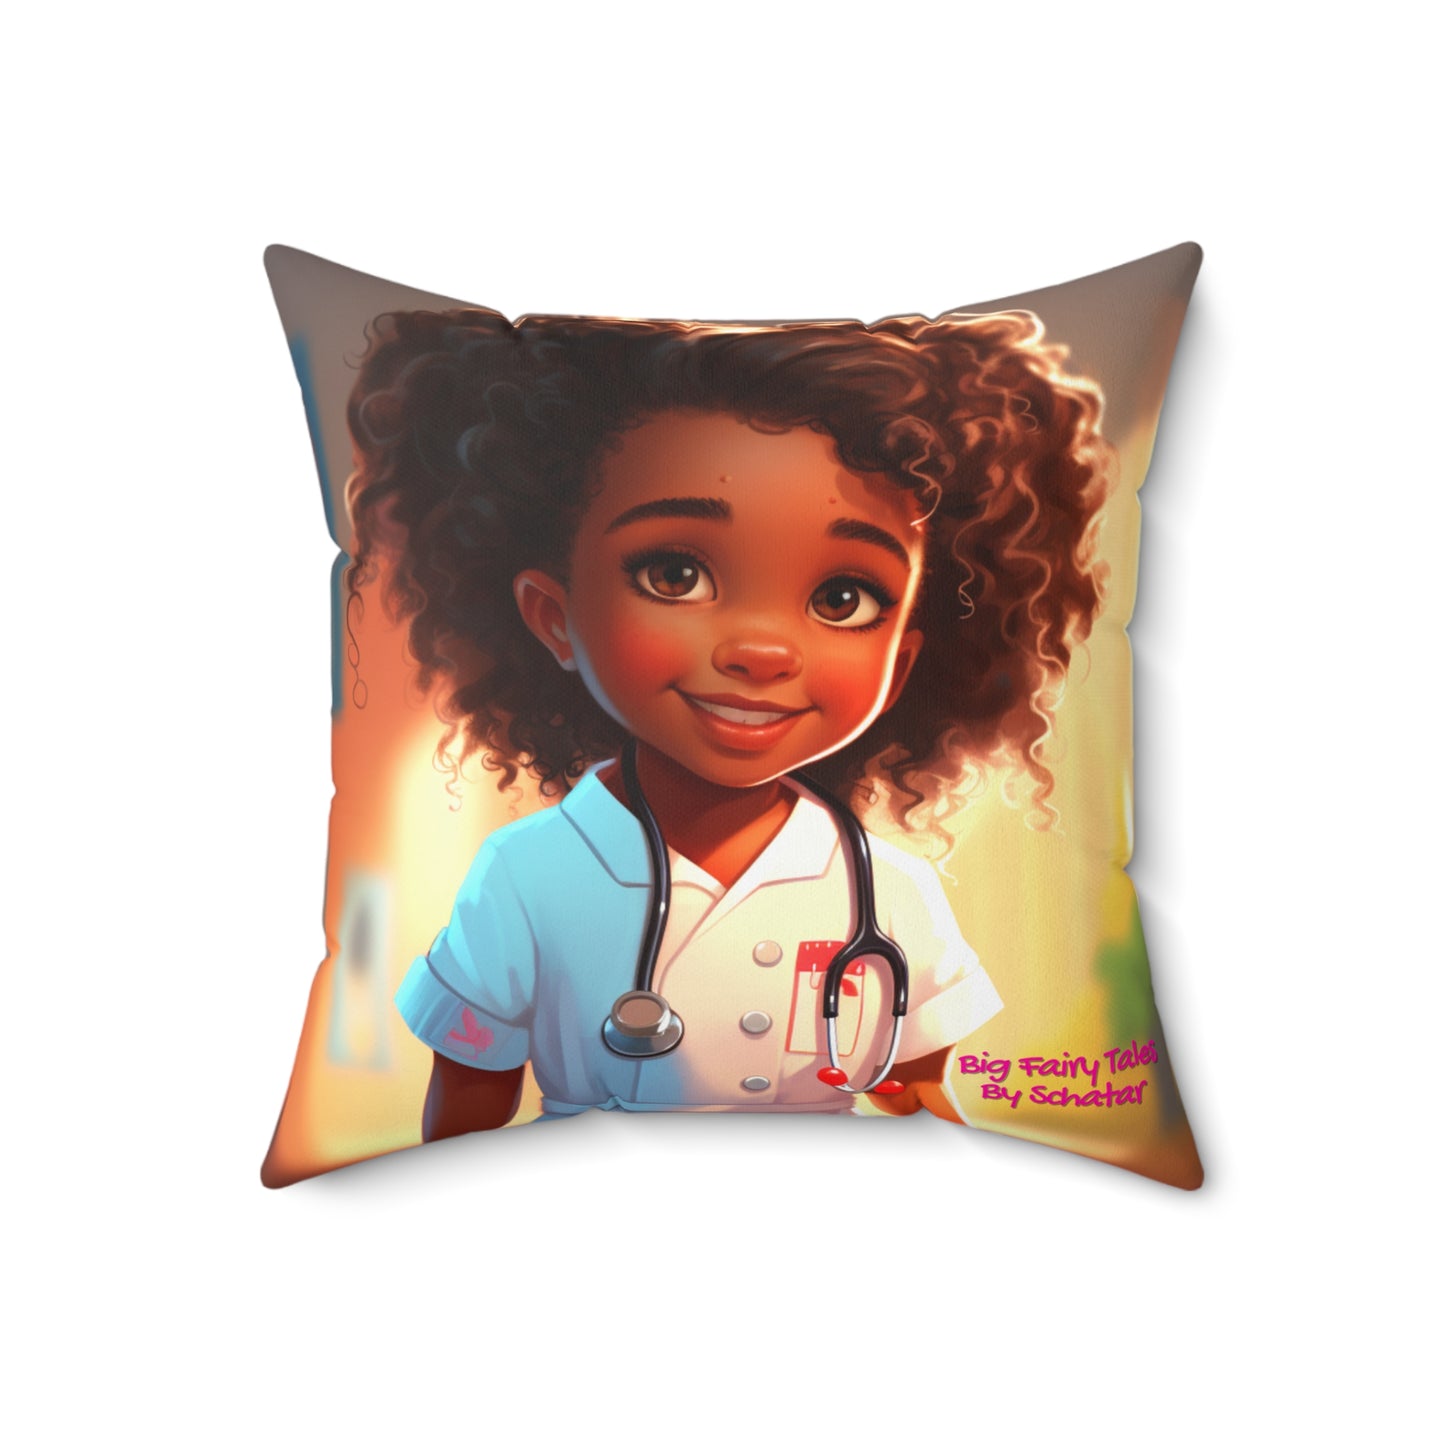 Nurse - Big Little Professionals Plush Pillow 19 From Big Fairy Tales By Schatar